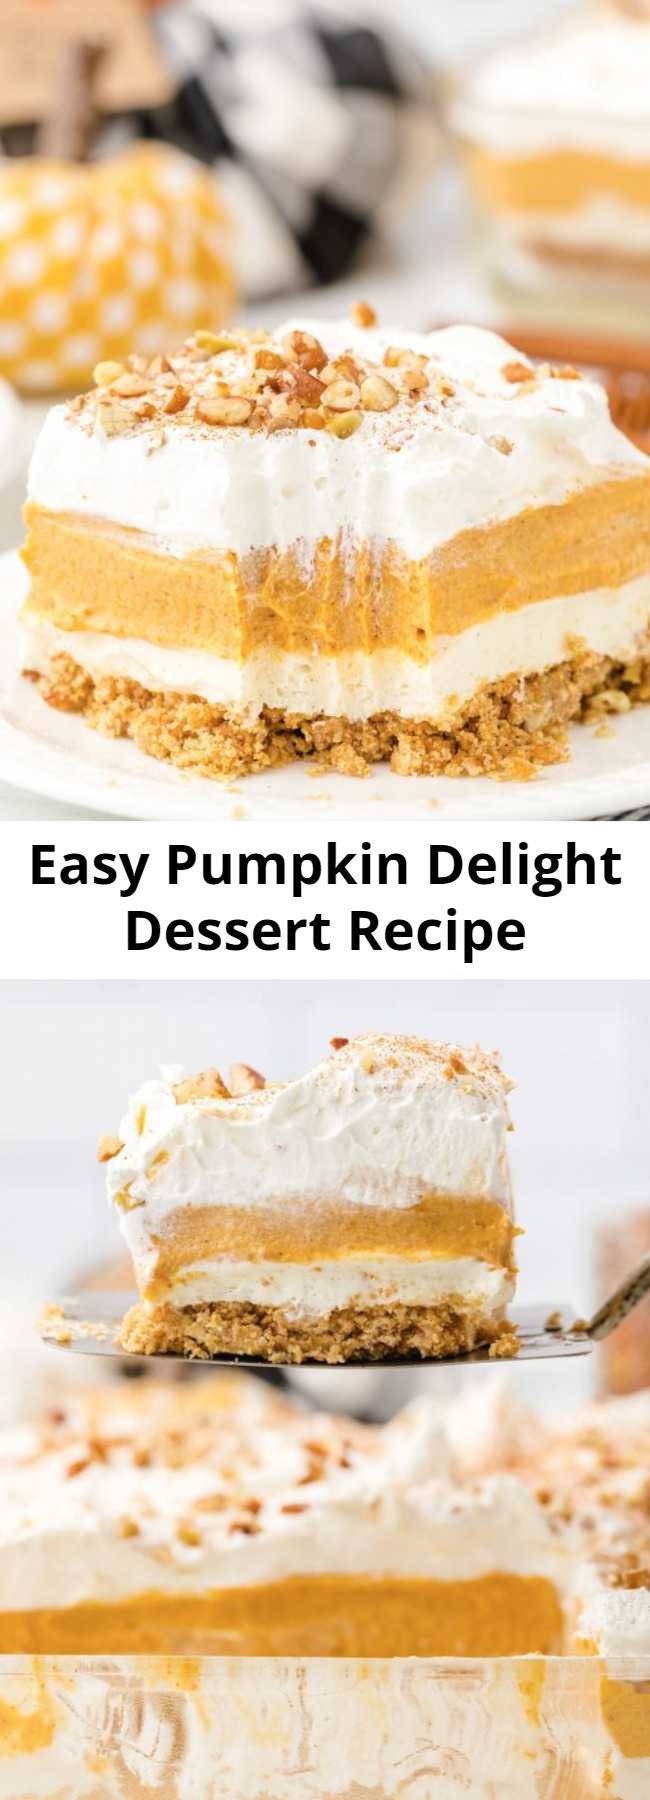 Easy Pumpkin Delight Dessert Recipe - Instead of classic pumpkin pie this fall (or Thanksgiving!), try this easy pumpkin delight instead! A homemade pecan and graham cracker mix forms a crust that is topped with layers of light and fluffy filling including cream cheese, pudding, and Cool Whip make an irresistible treat.